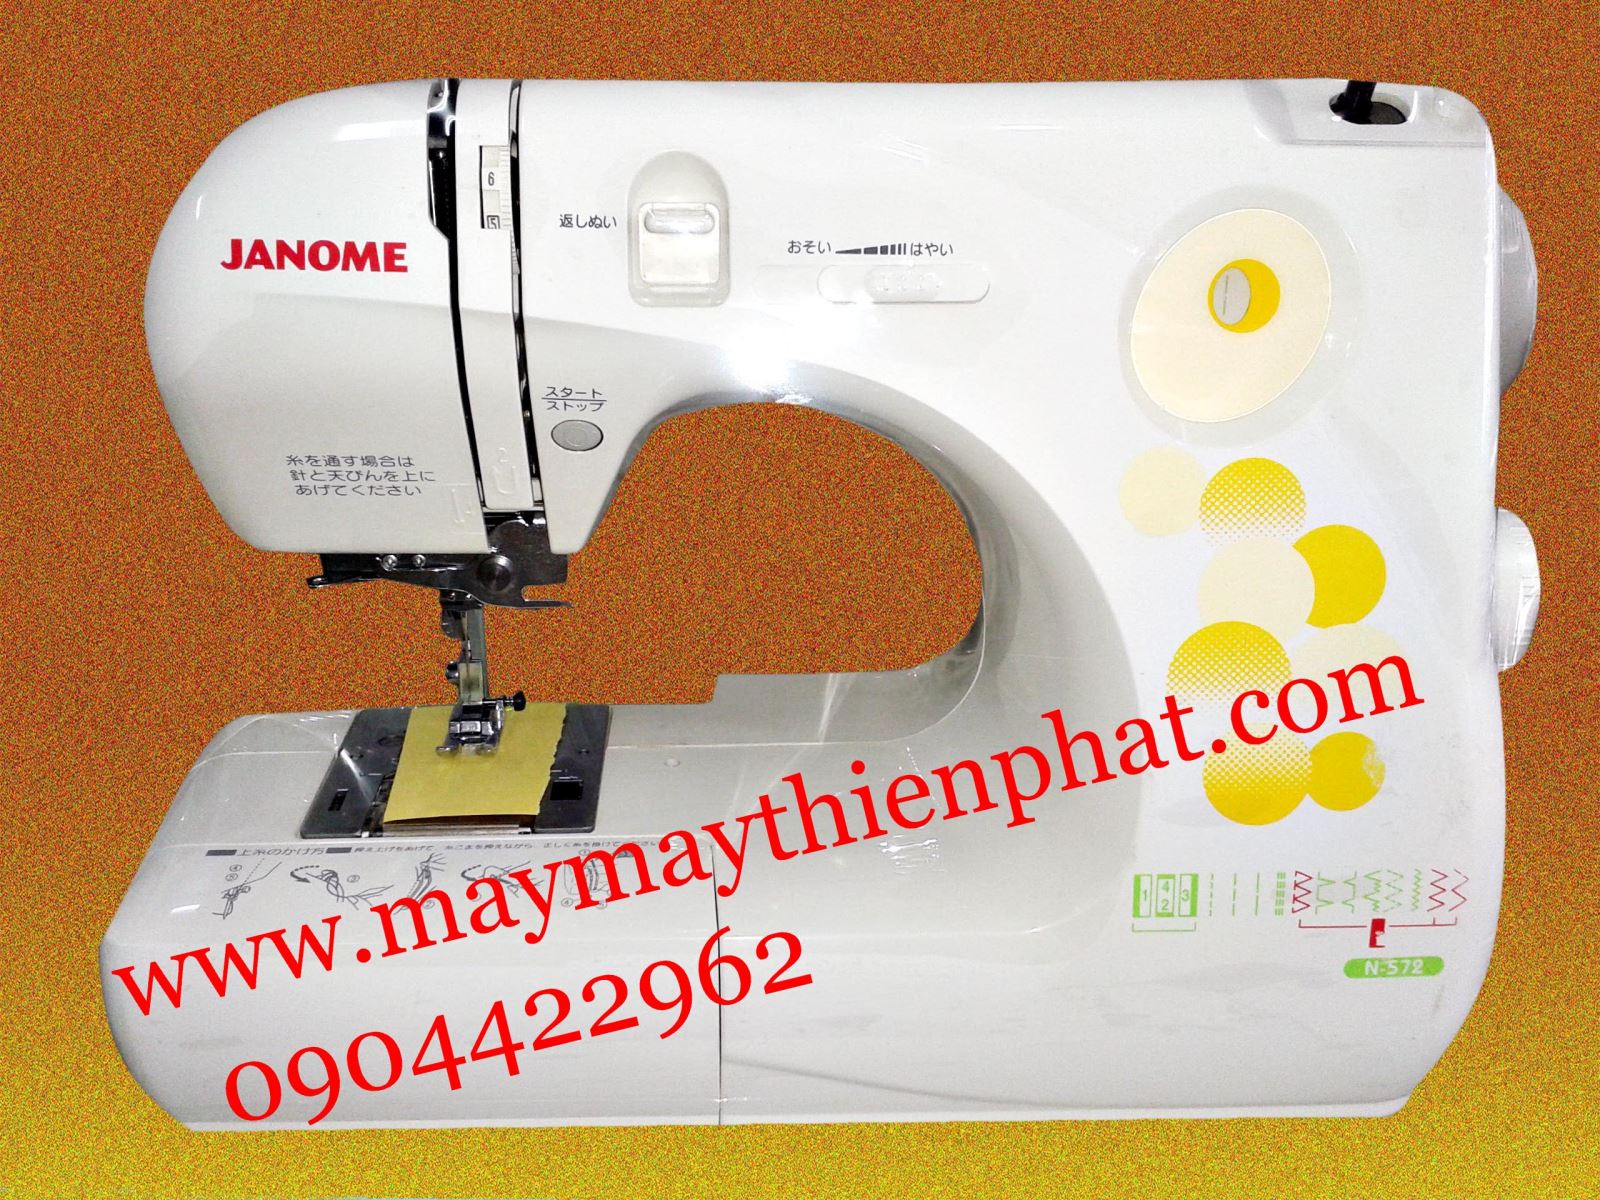 JANOME N-752